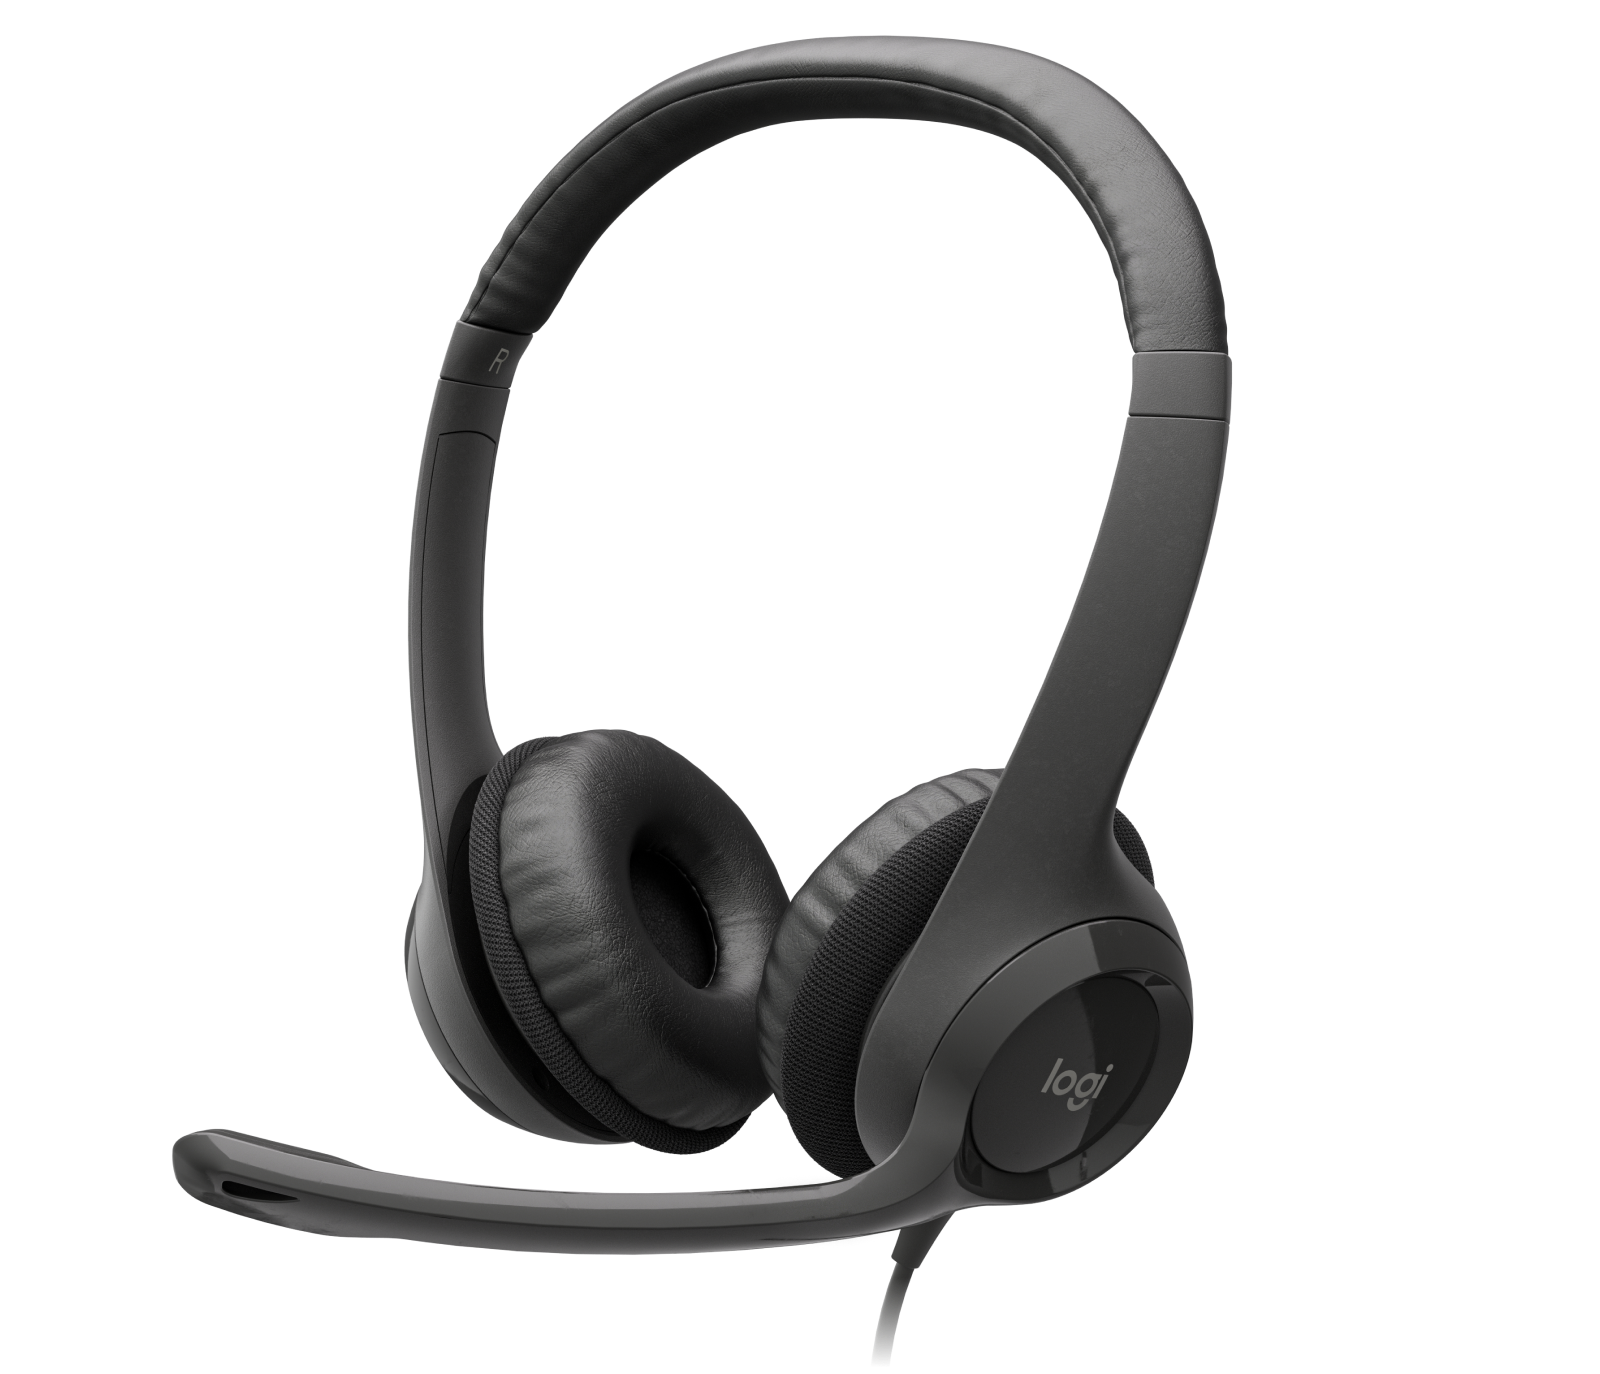 Logitech Headset with Noise-Canceling Mic